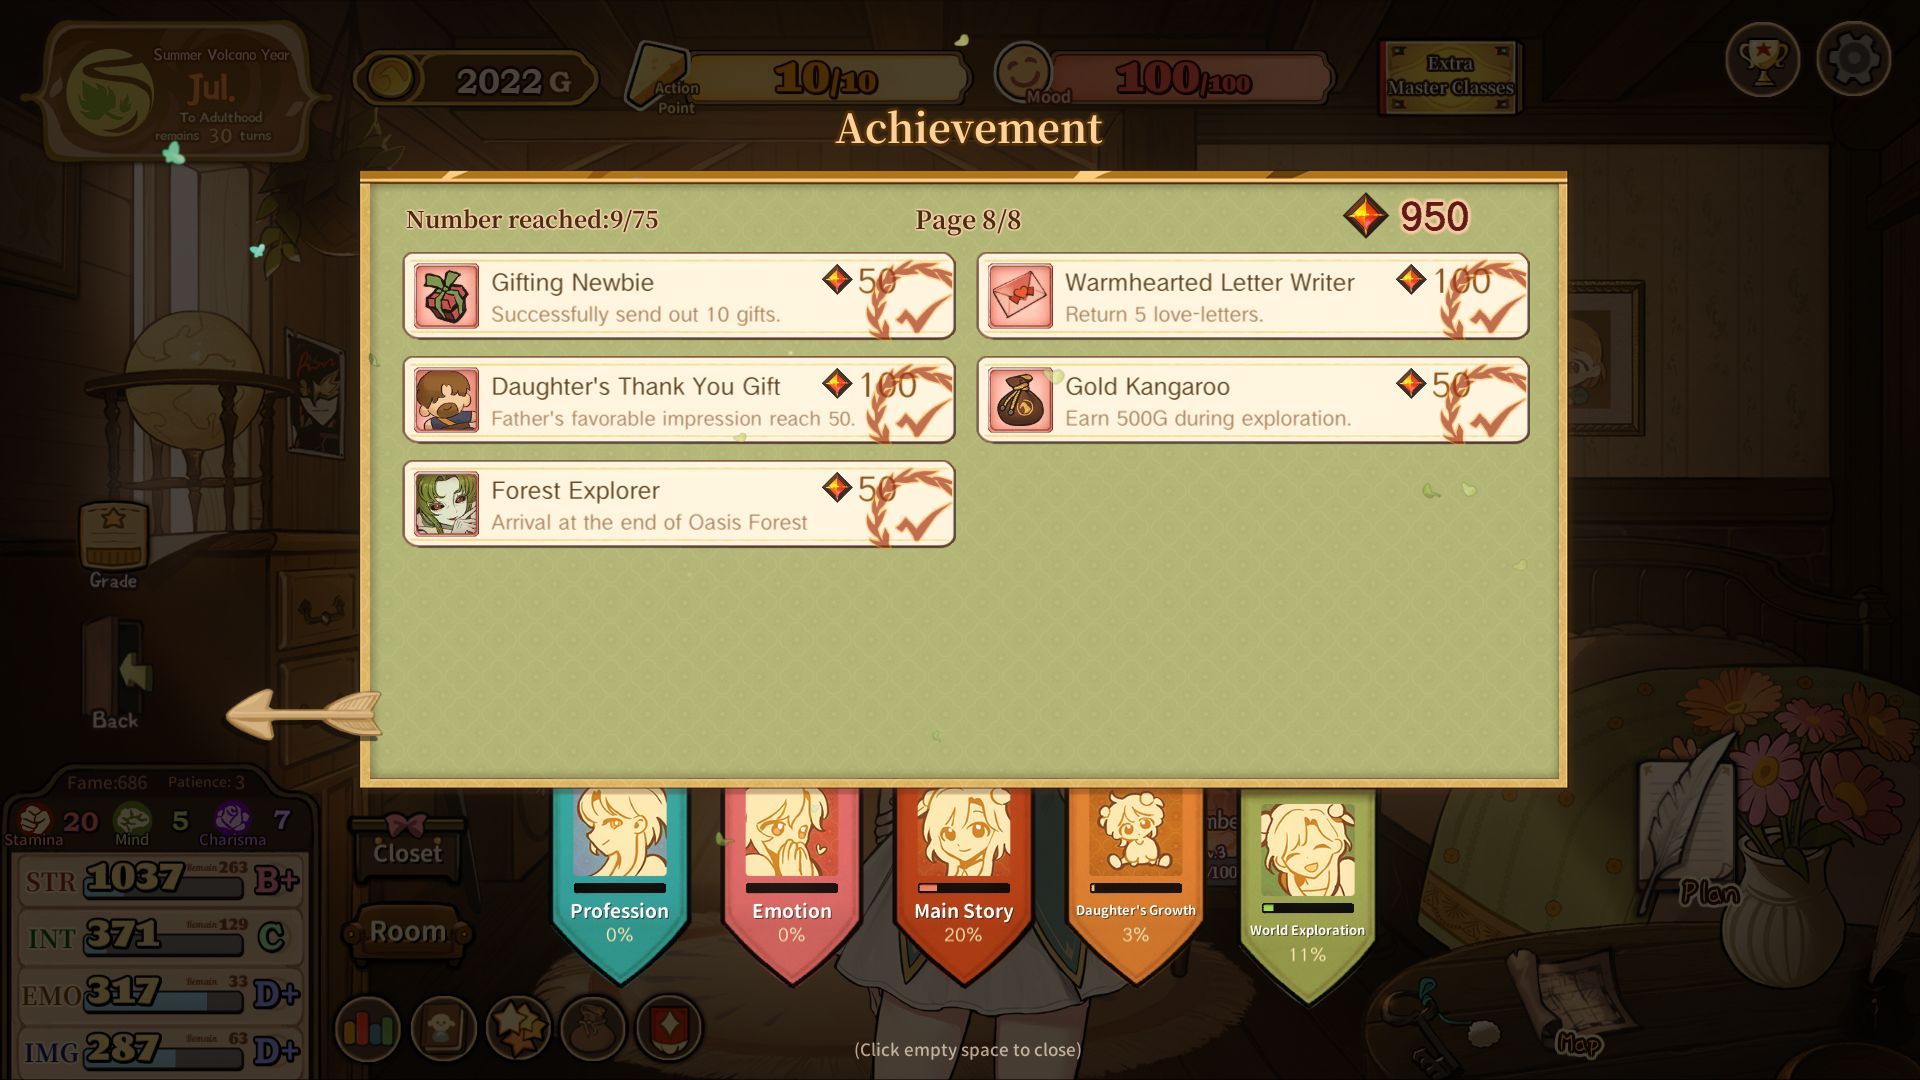 Achievements in Volcano Princess provide upgrade points for future play.